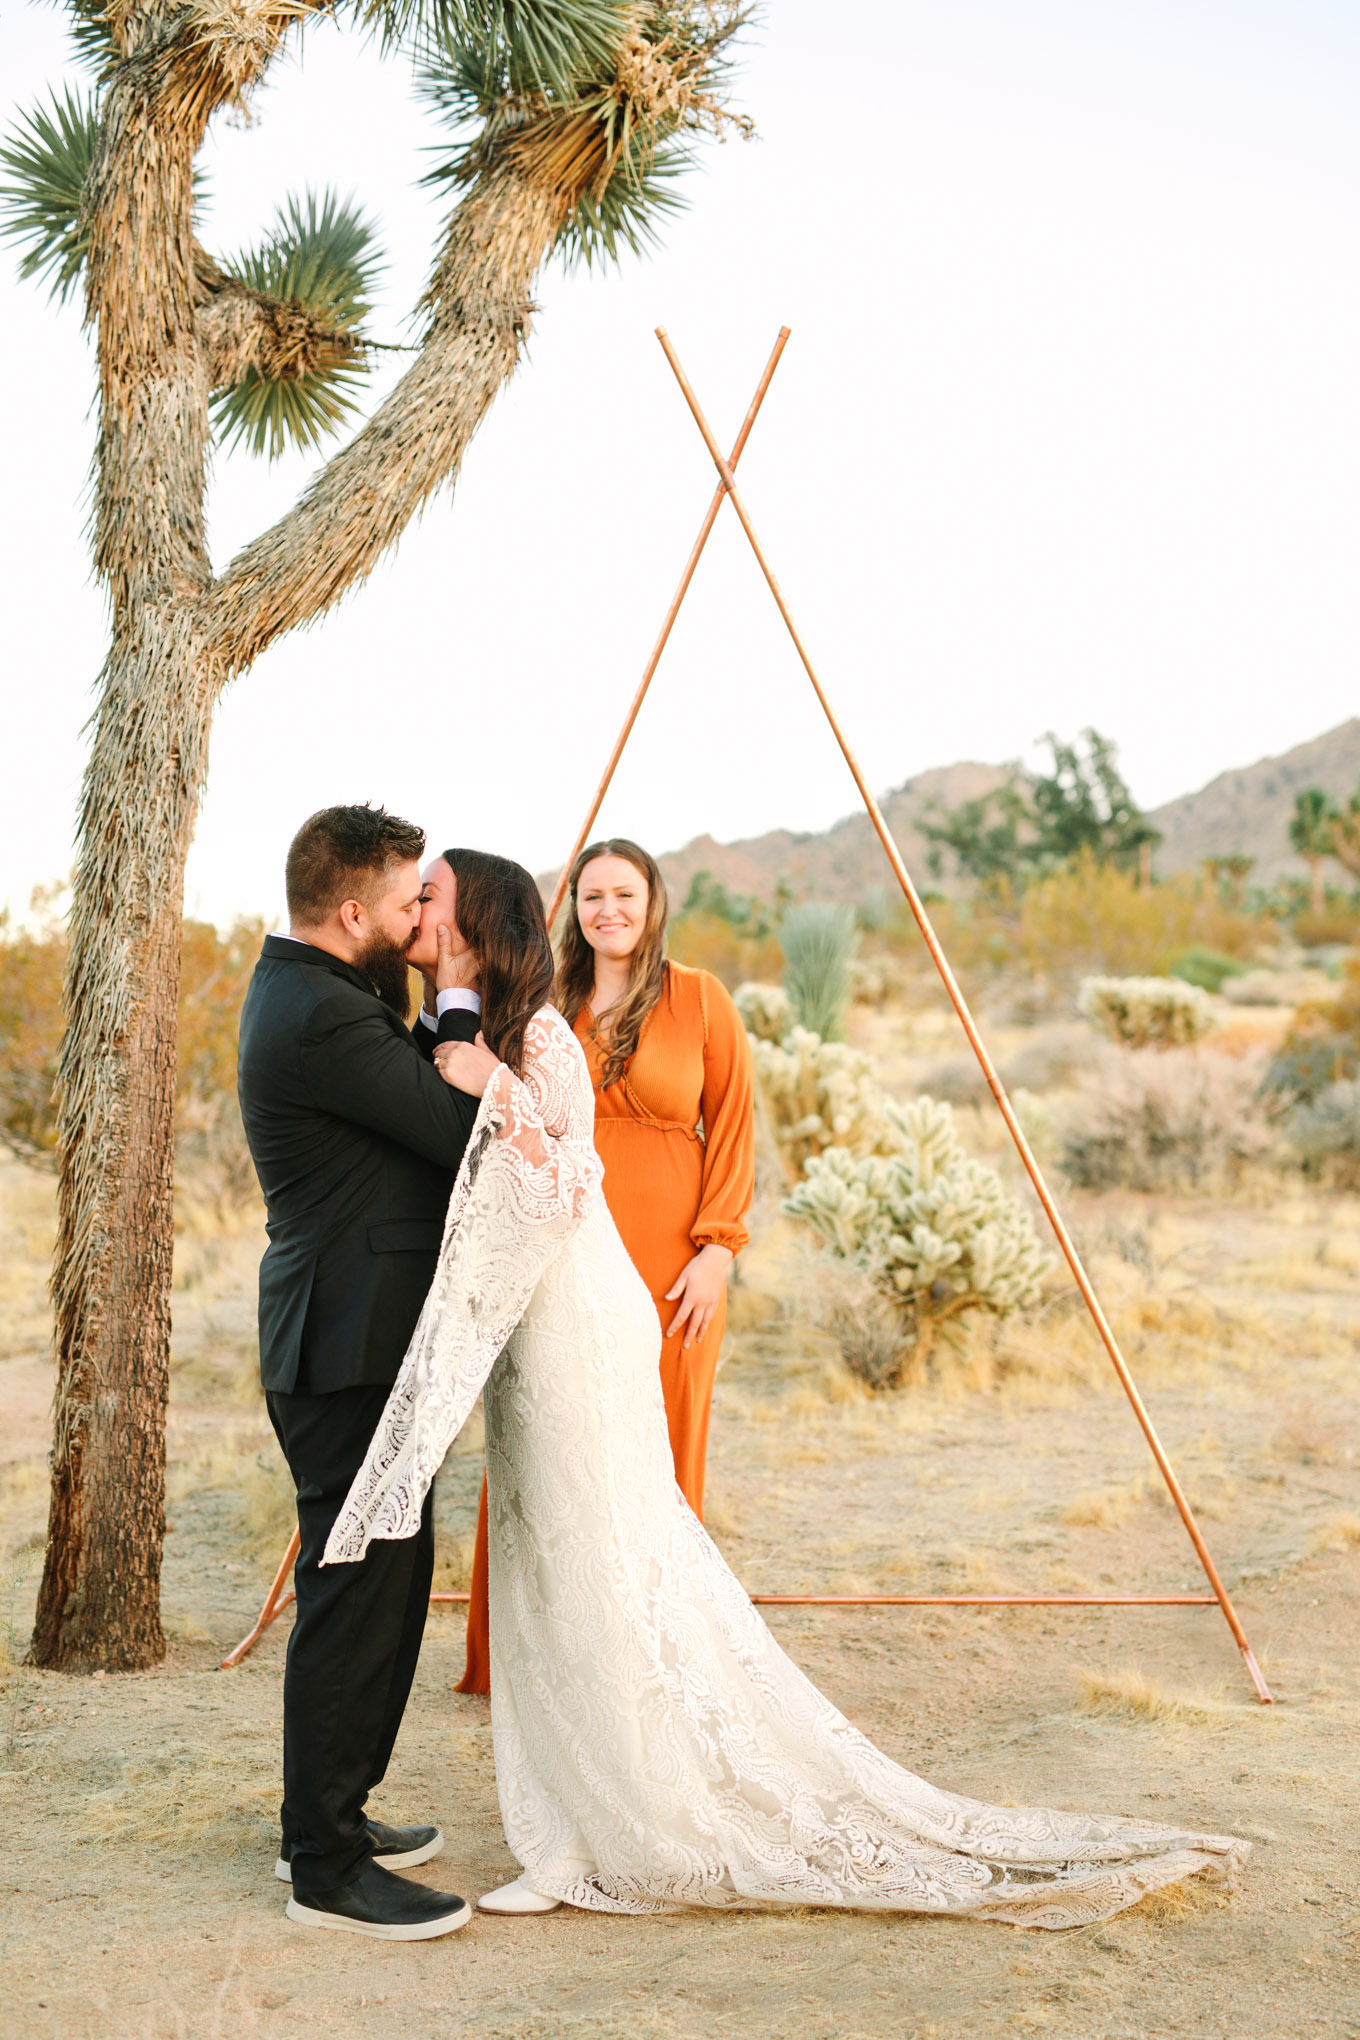 Joshua Tree elopement with triangle arch | Engagement, elopement, and wedding photography roundup of Mary Costa’s favorite images from 2020 | Colorful and elevated photography for fun-loving couples in Southern California | #2020wedding #elopement #weddingphoto #weddingphotography #microwedding   Source: Mary Costa Photography | Los Angeles